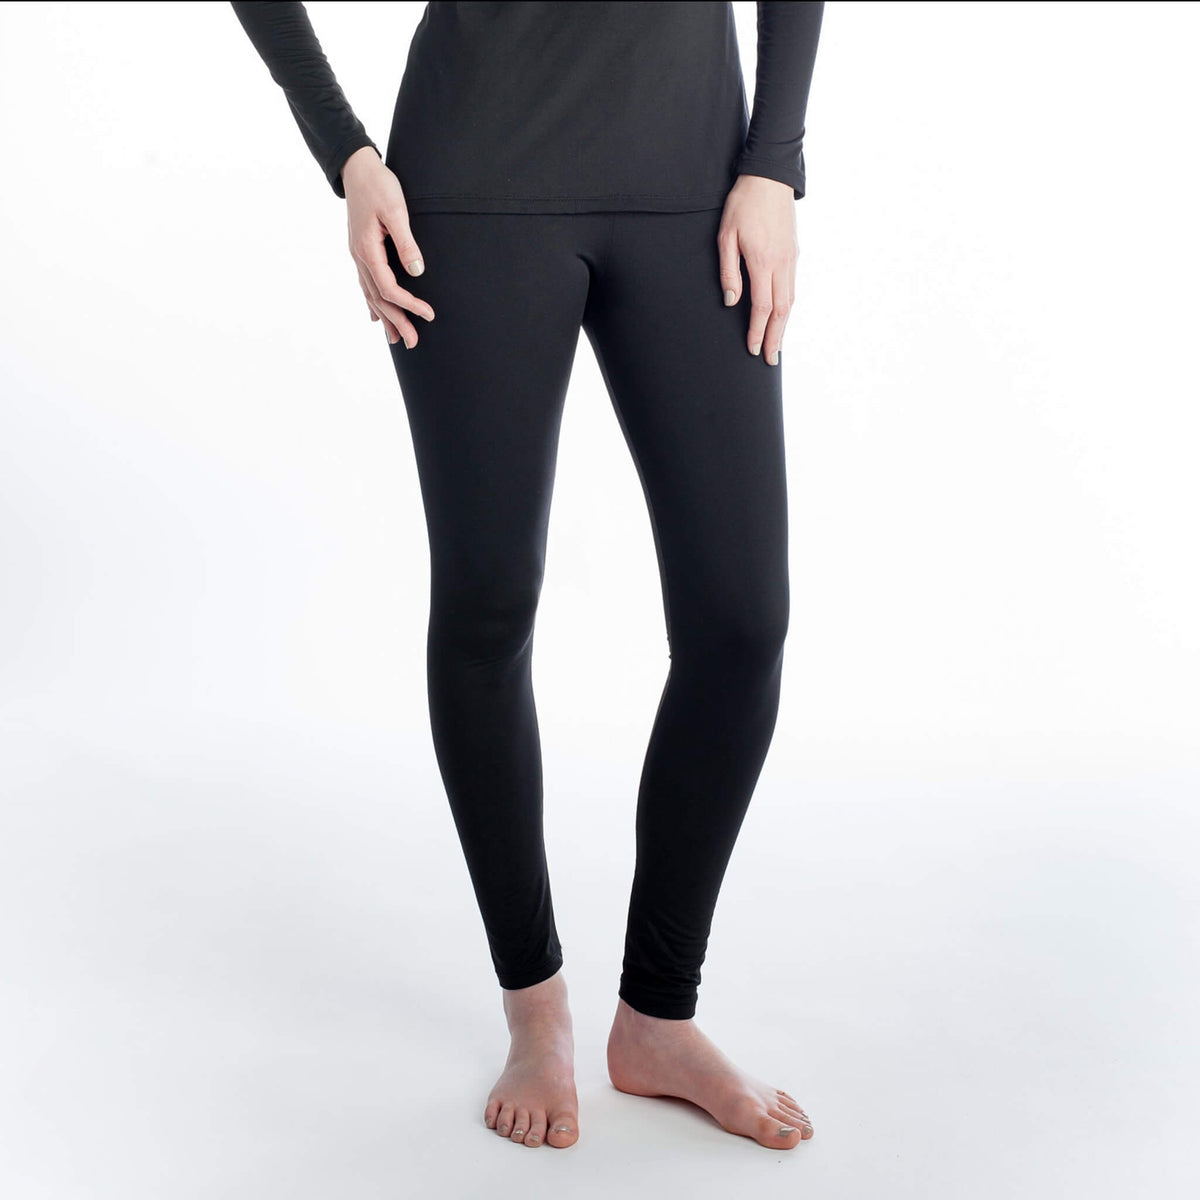 Nevica Banff Thermal Womens Tights – Stockpoint Apparel Outlet